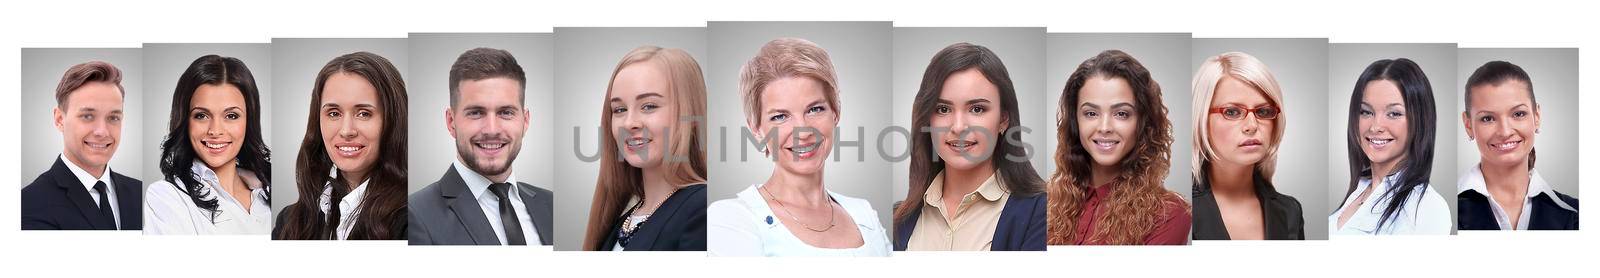 panoramic collage of portraits of successful business people by asdf